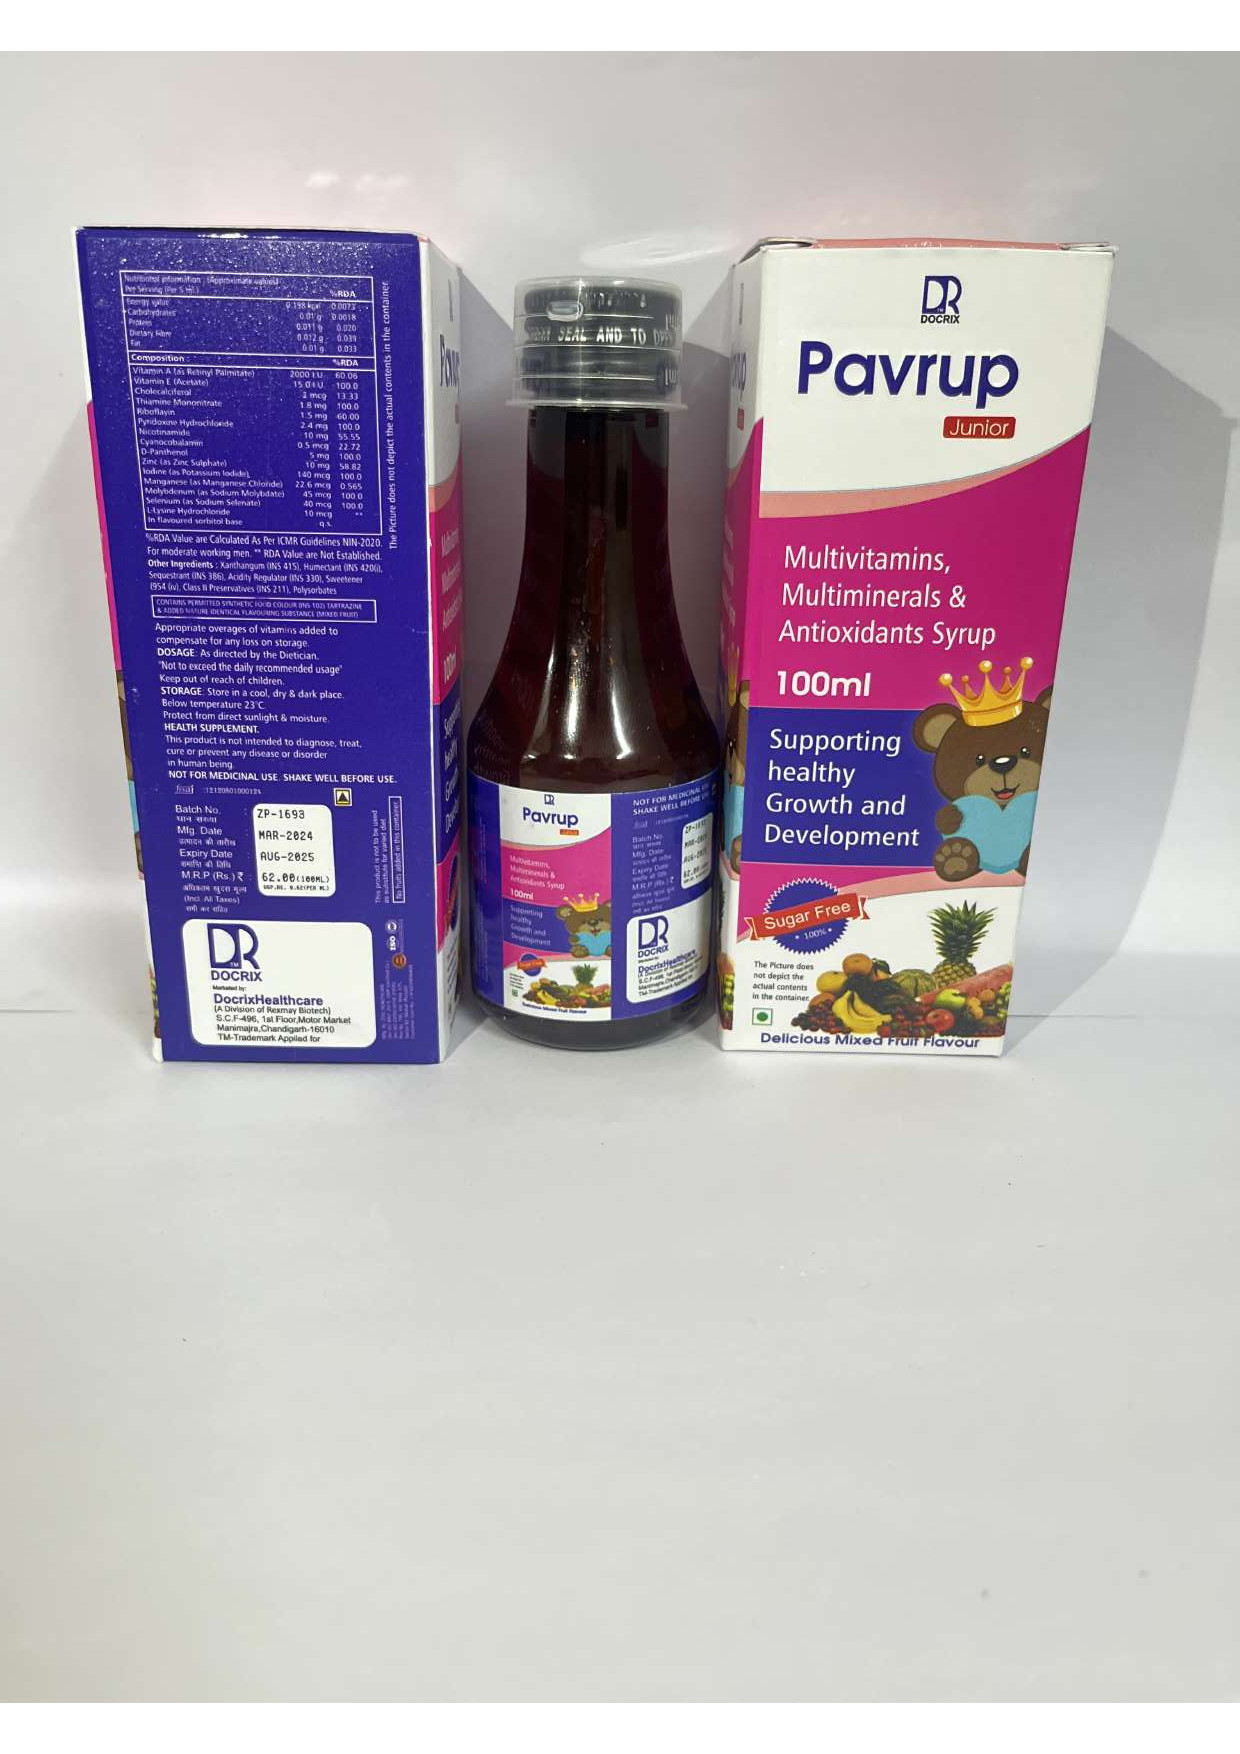 Product Name: Pavrup, Compositions of Pavrup are Multivitamins  Multiminerals & Antioxidants Syrup - Docrix Healthcare